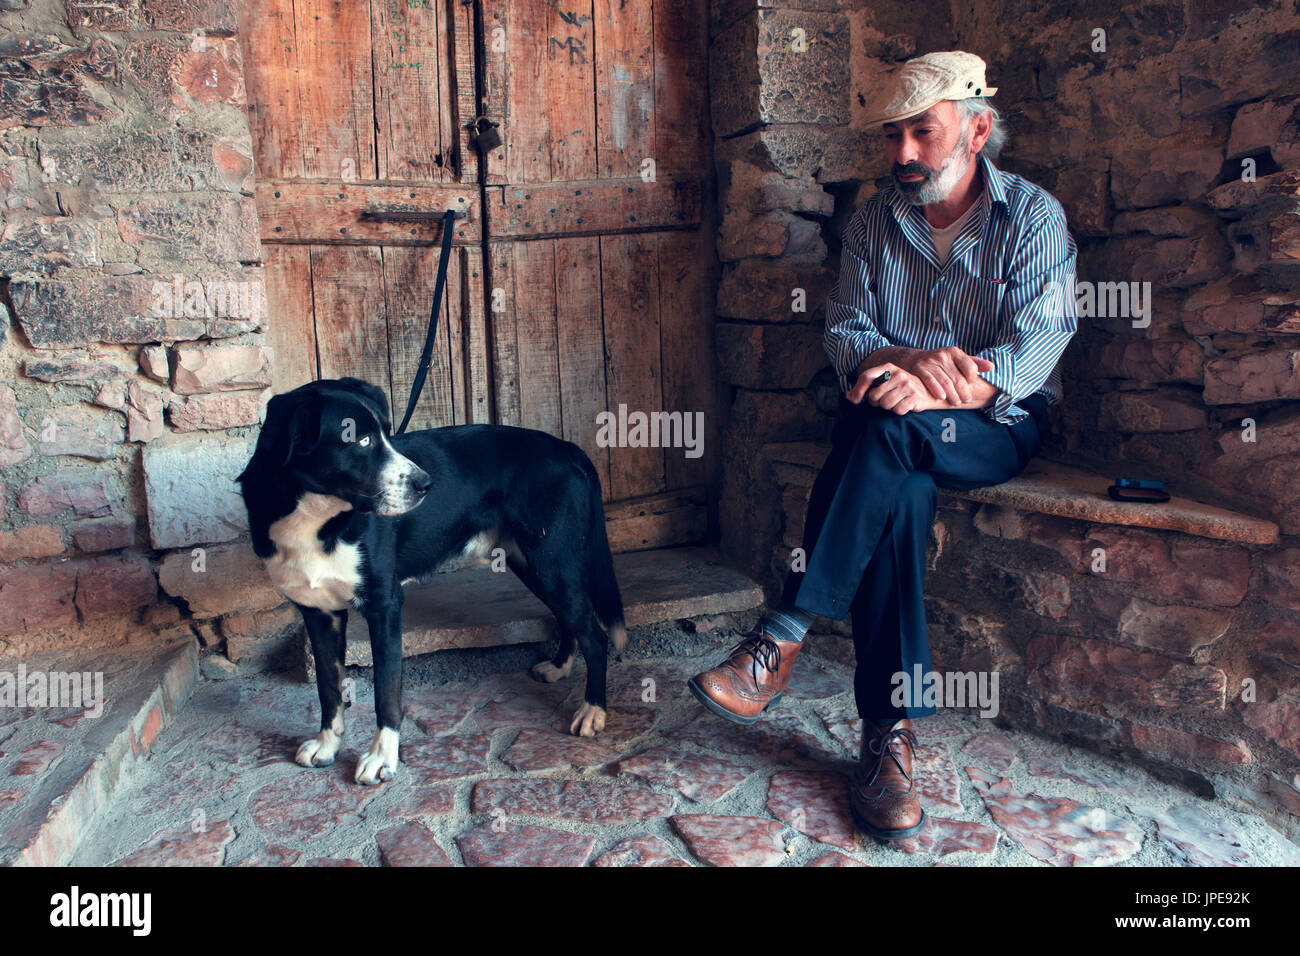 Europe, Italy,Umbria, Perugia district,Collepino Man's best friend Stock Photo